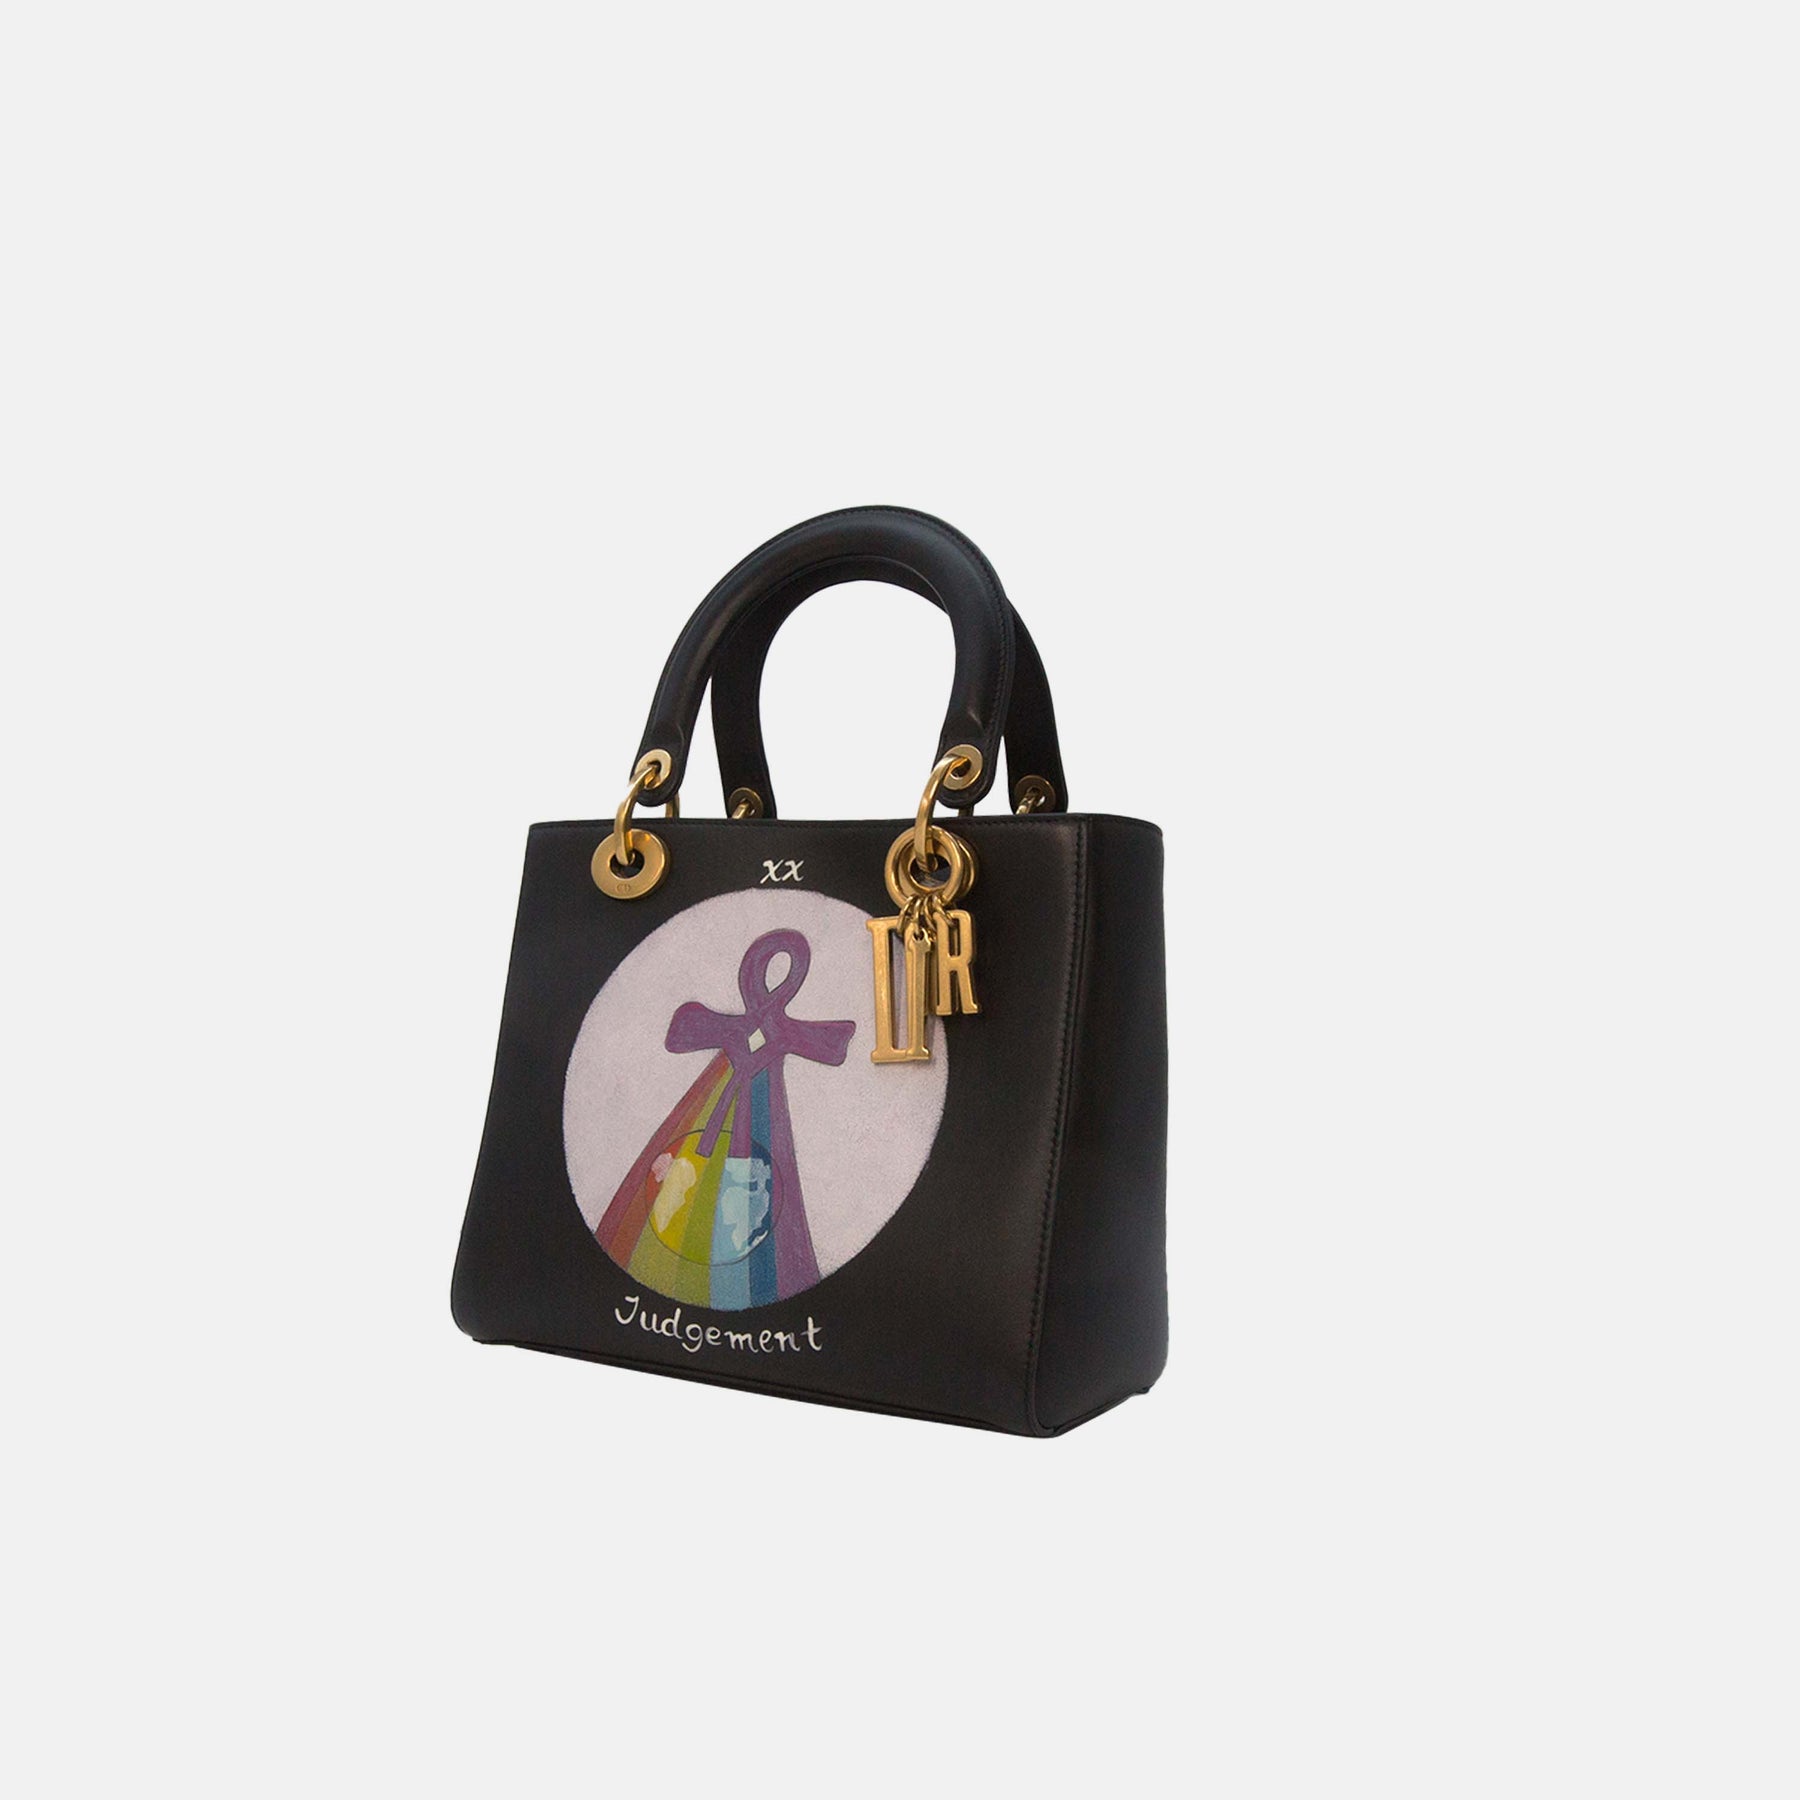 Diors New Tarot Bags and More Have Arrived on Bergdorf Goodmans Website   PurseBlog